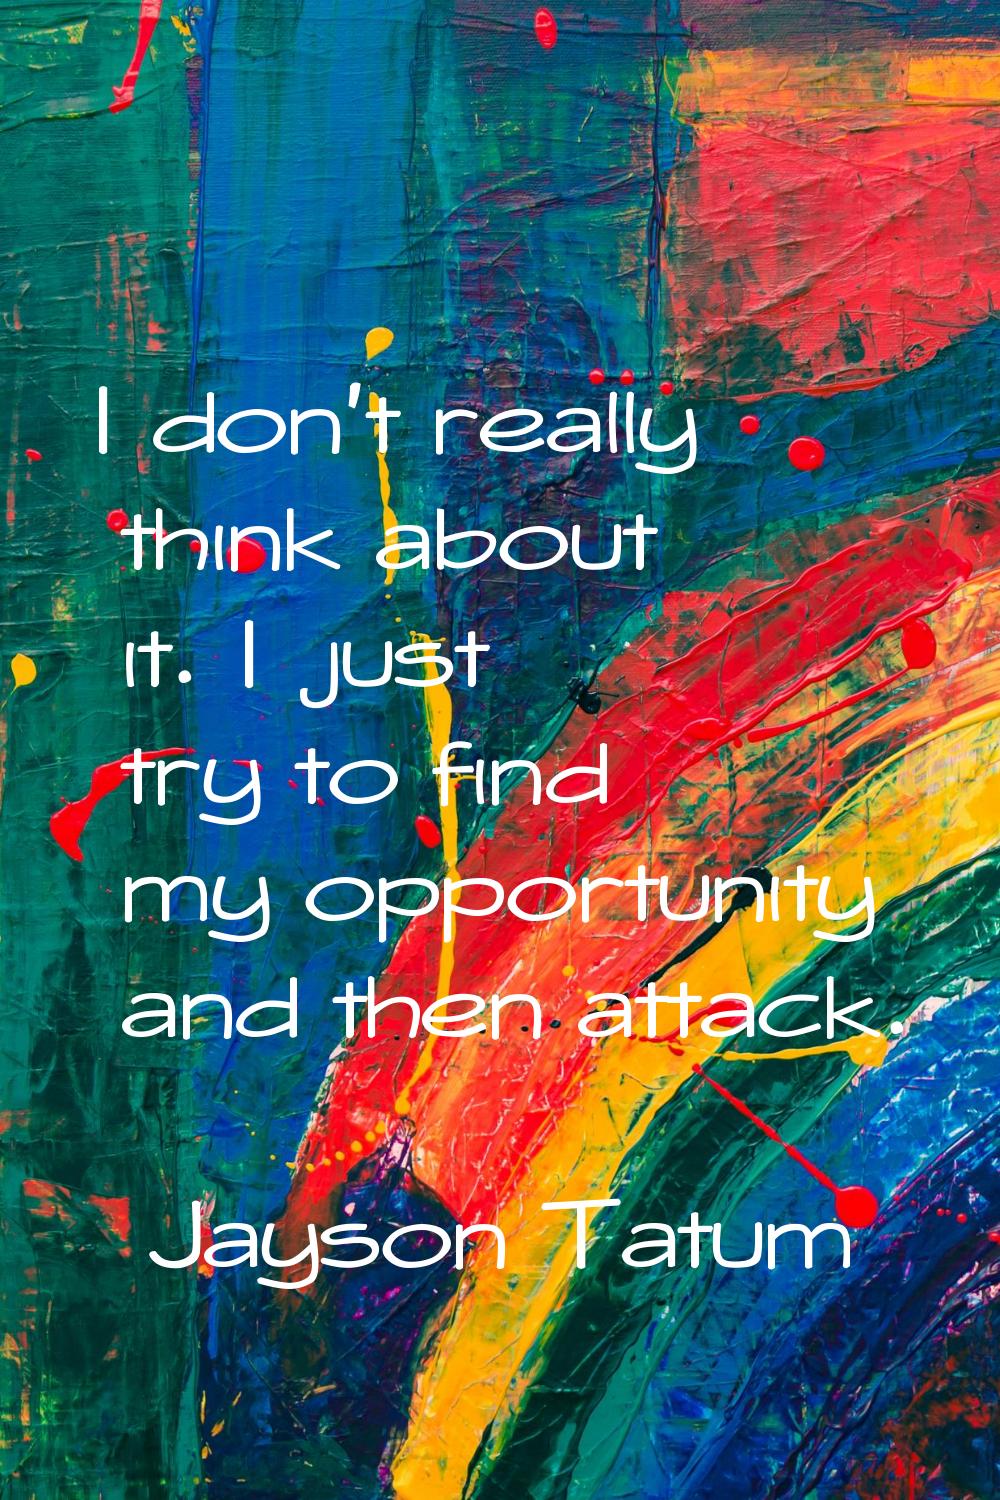 I don't really think about it. I just try to find my opportunity and then attack.